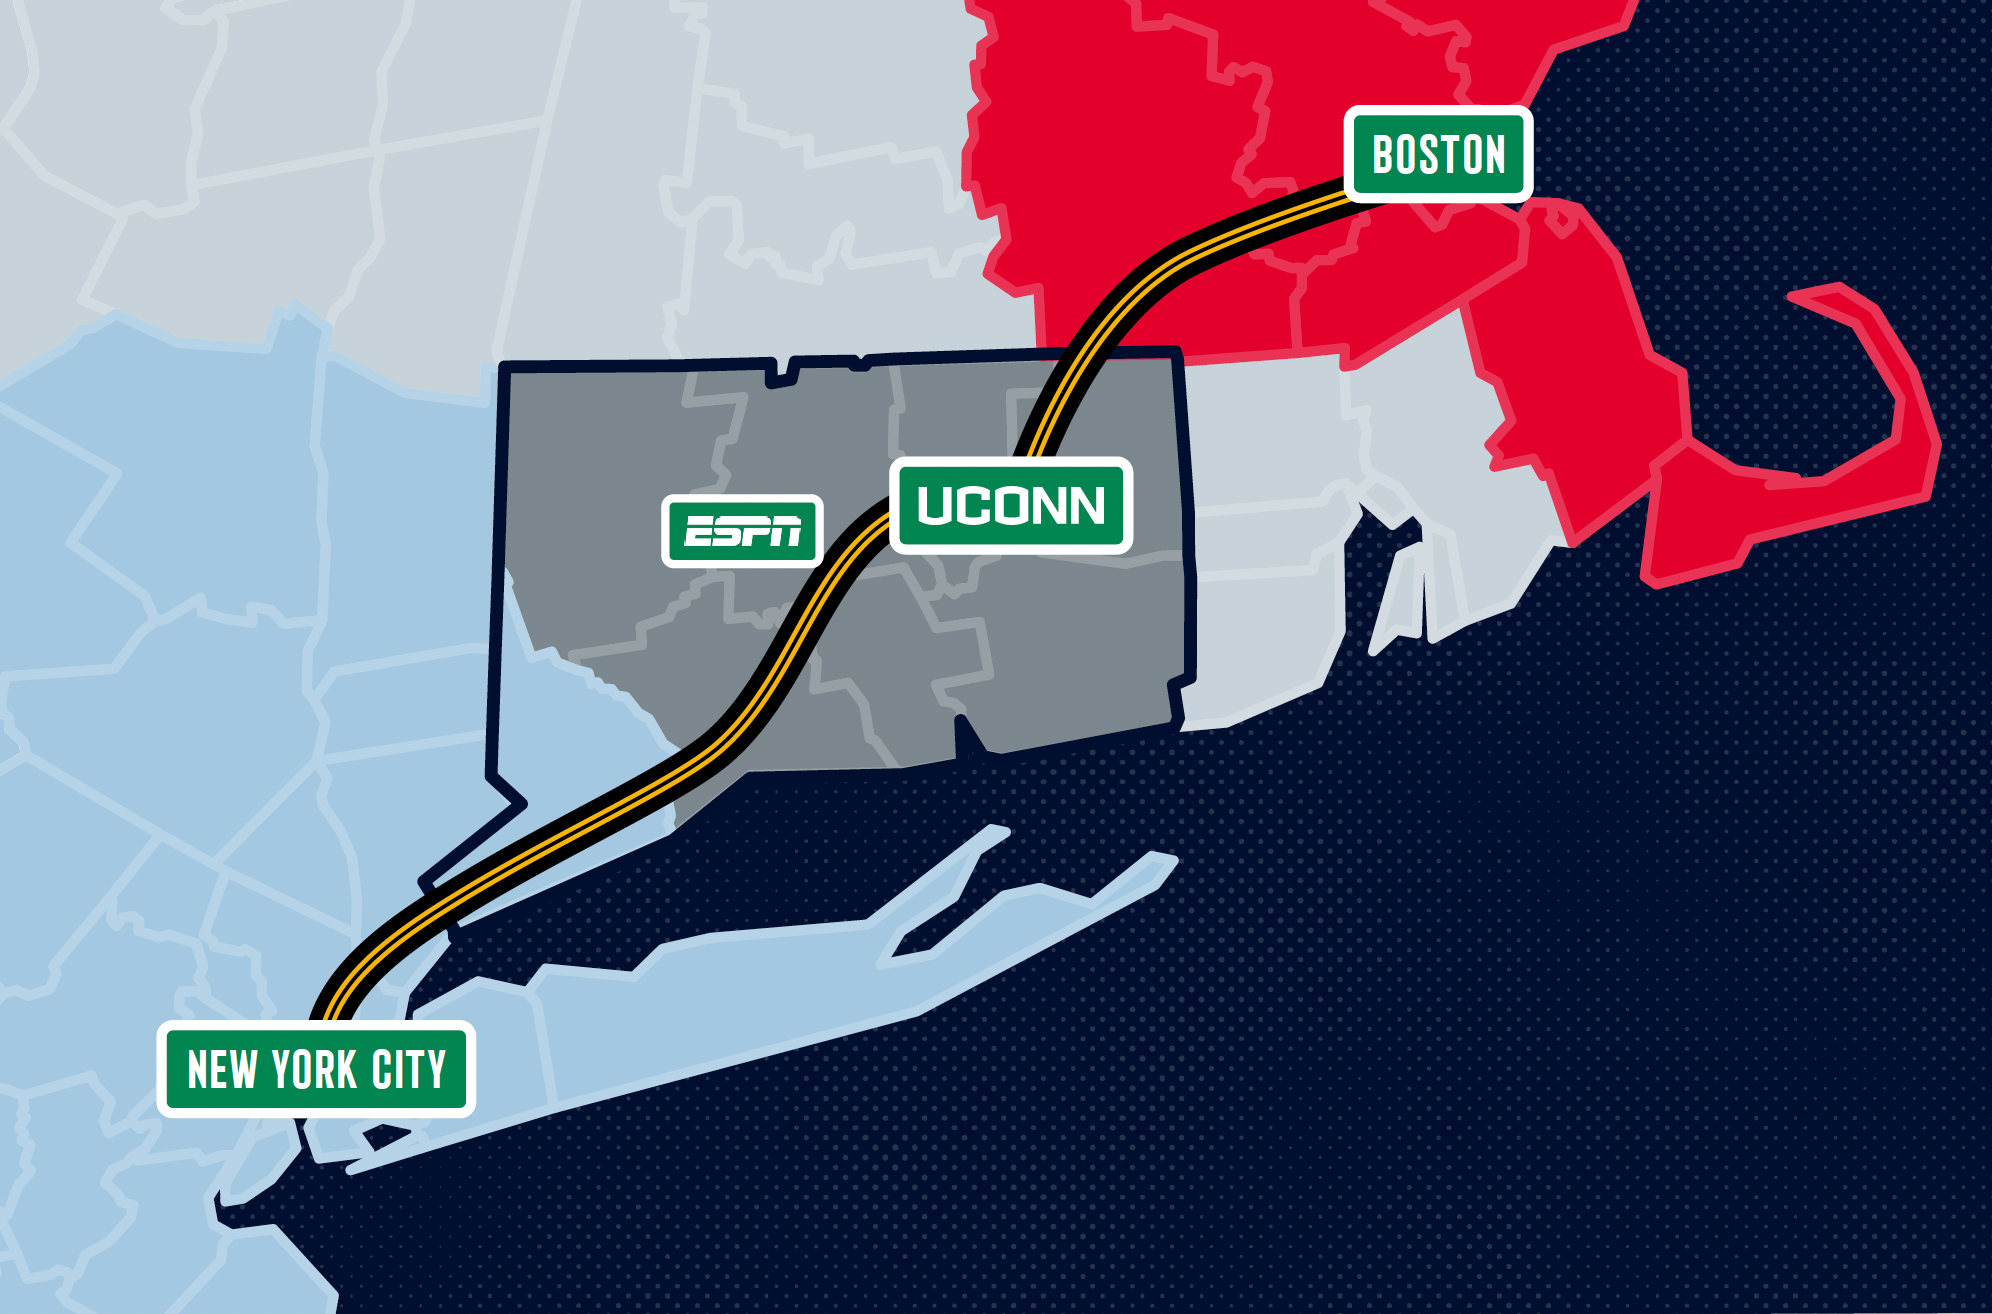 a map of UConn Connecticut, New York, Boston, and ESPN, all connected through a road